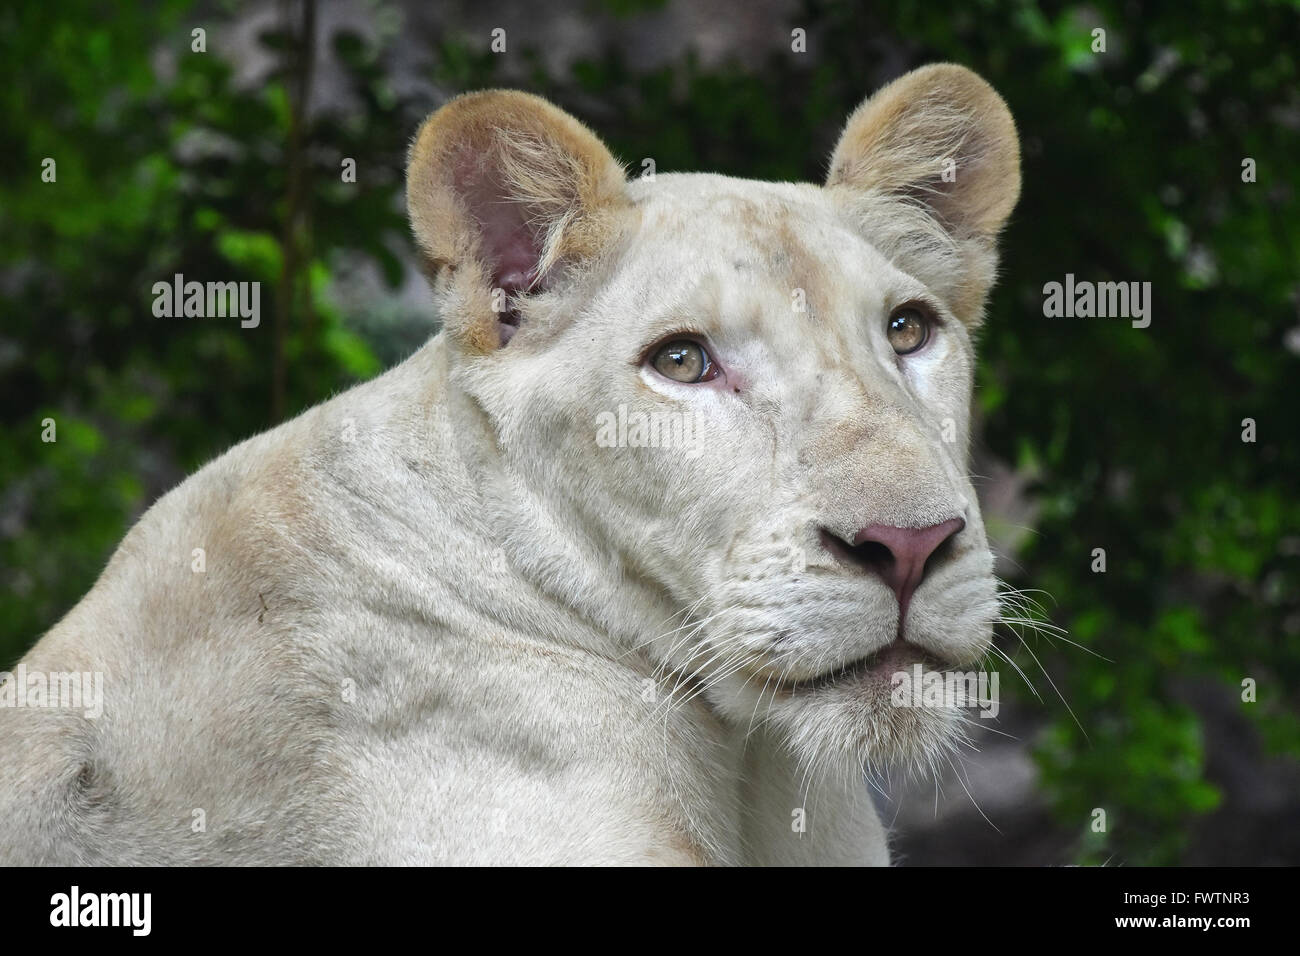 Young white African lioness close up portrait in zoo environment Stock Photo